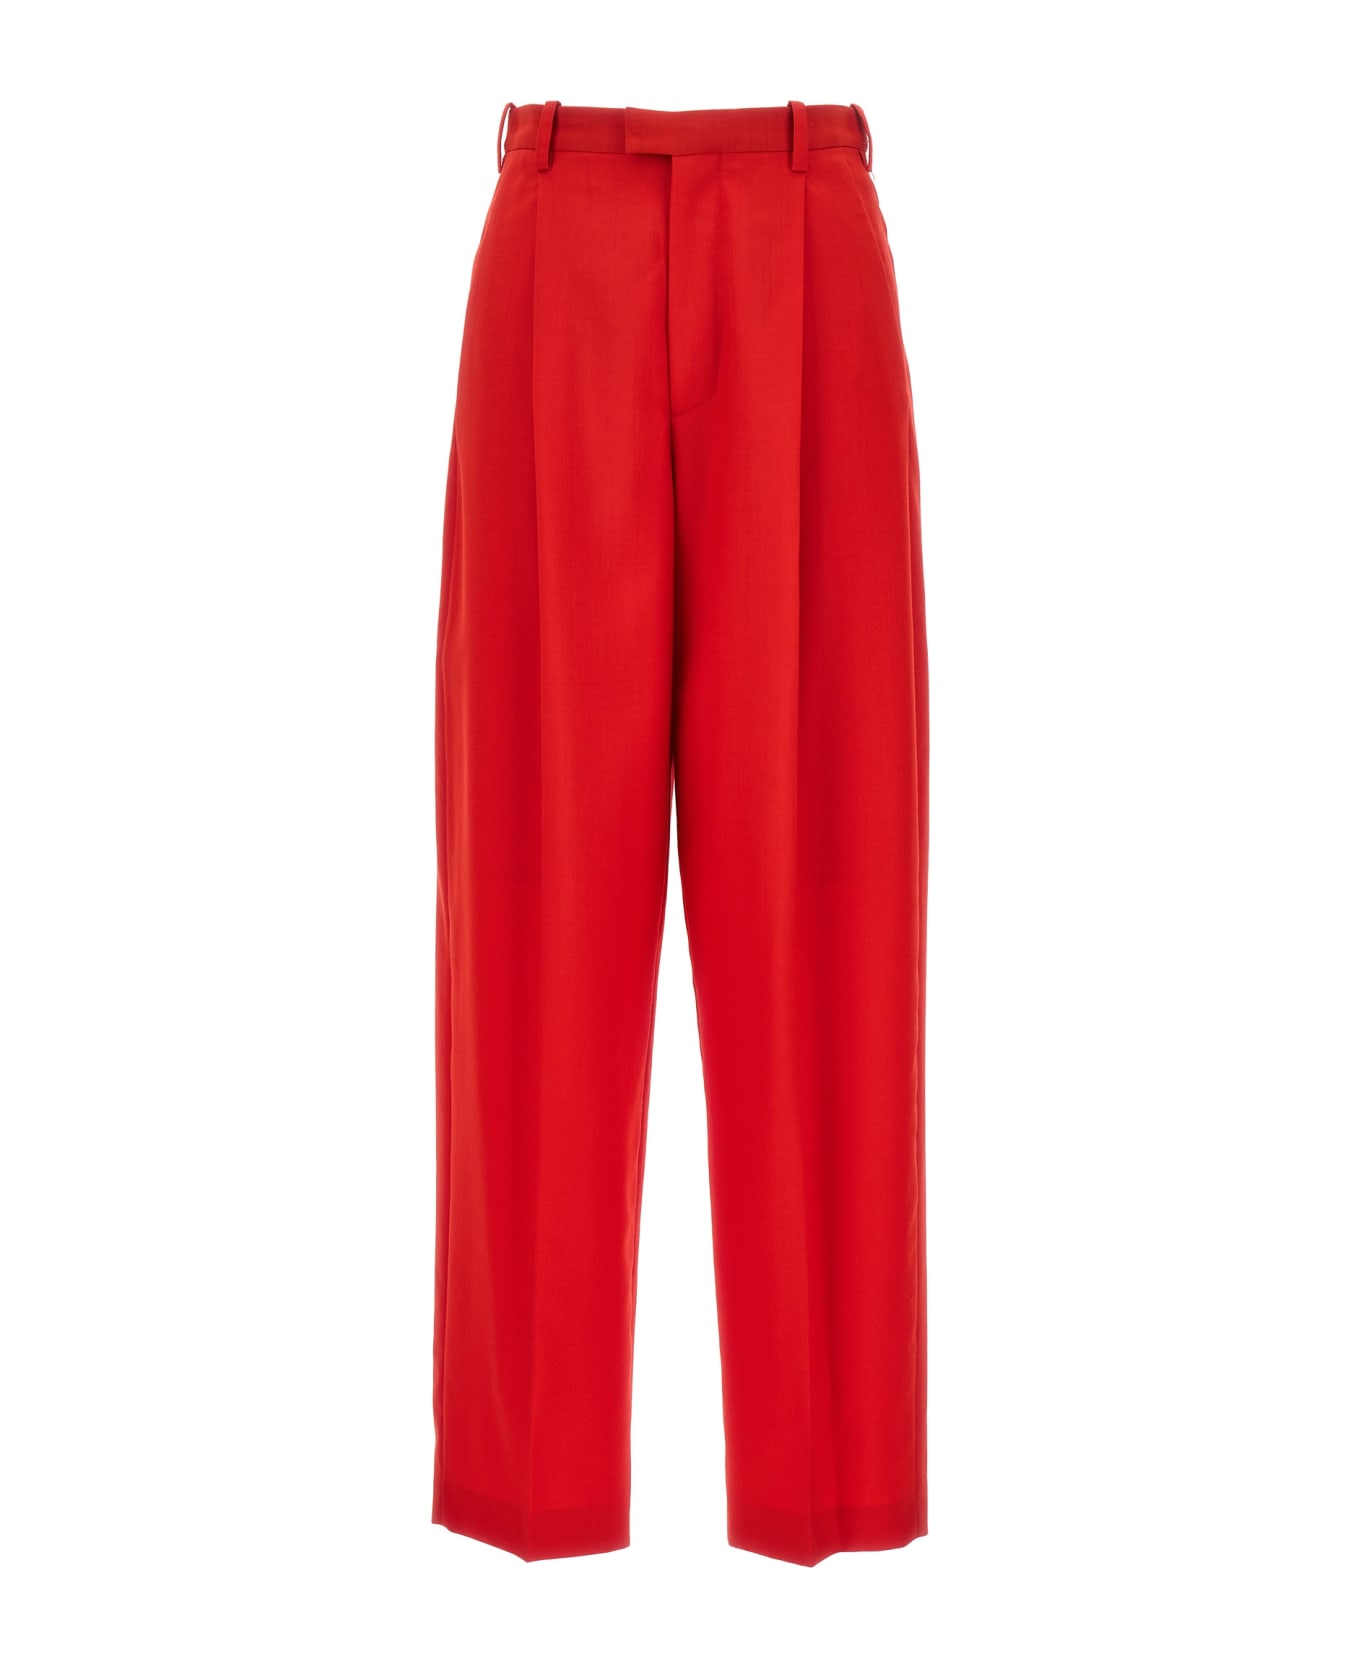 Marni Front Pleat Pants - Red ボトムス